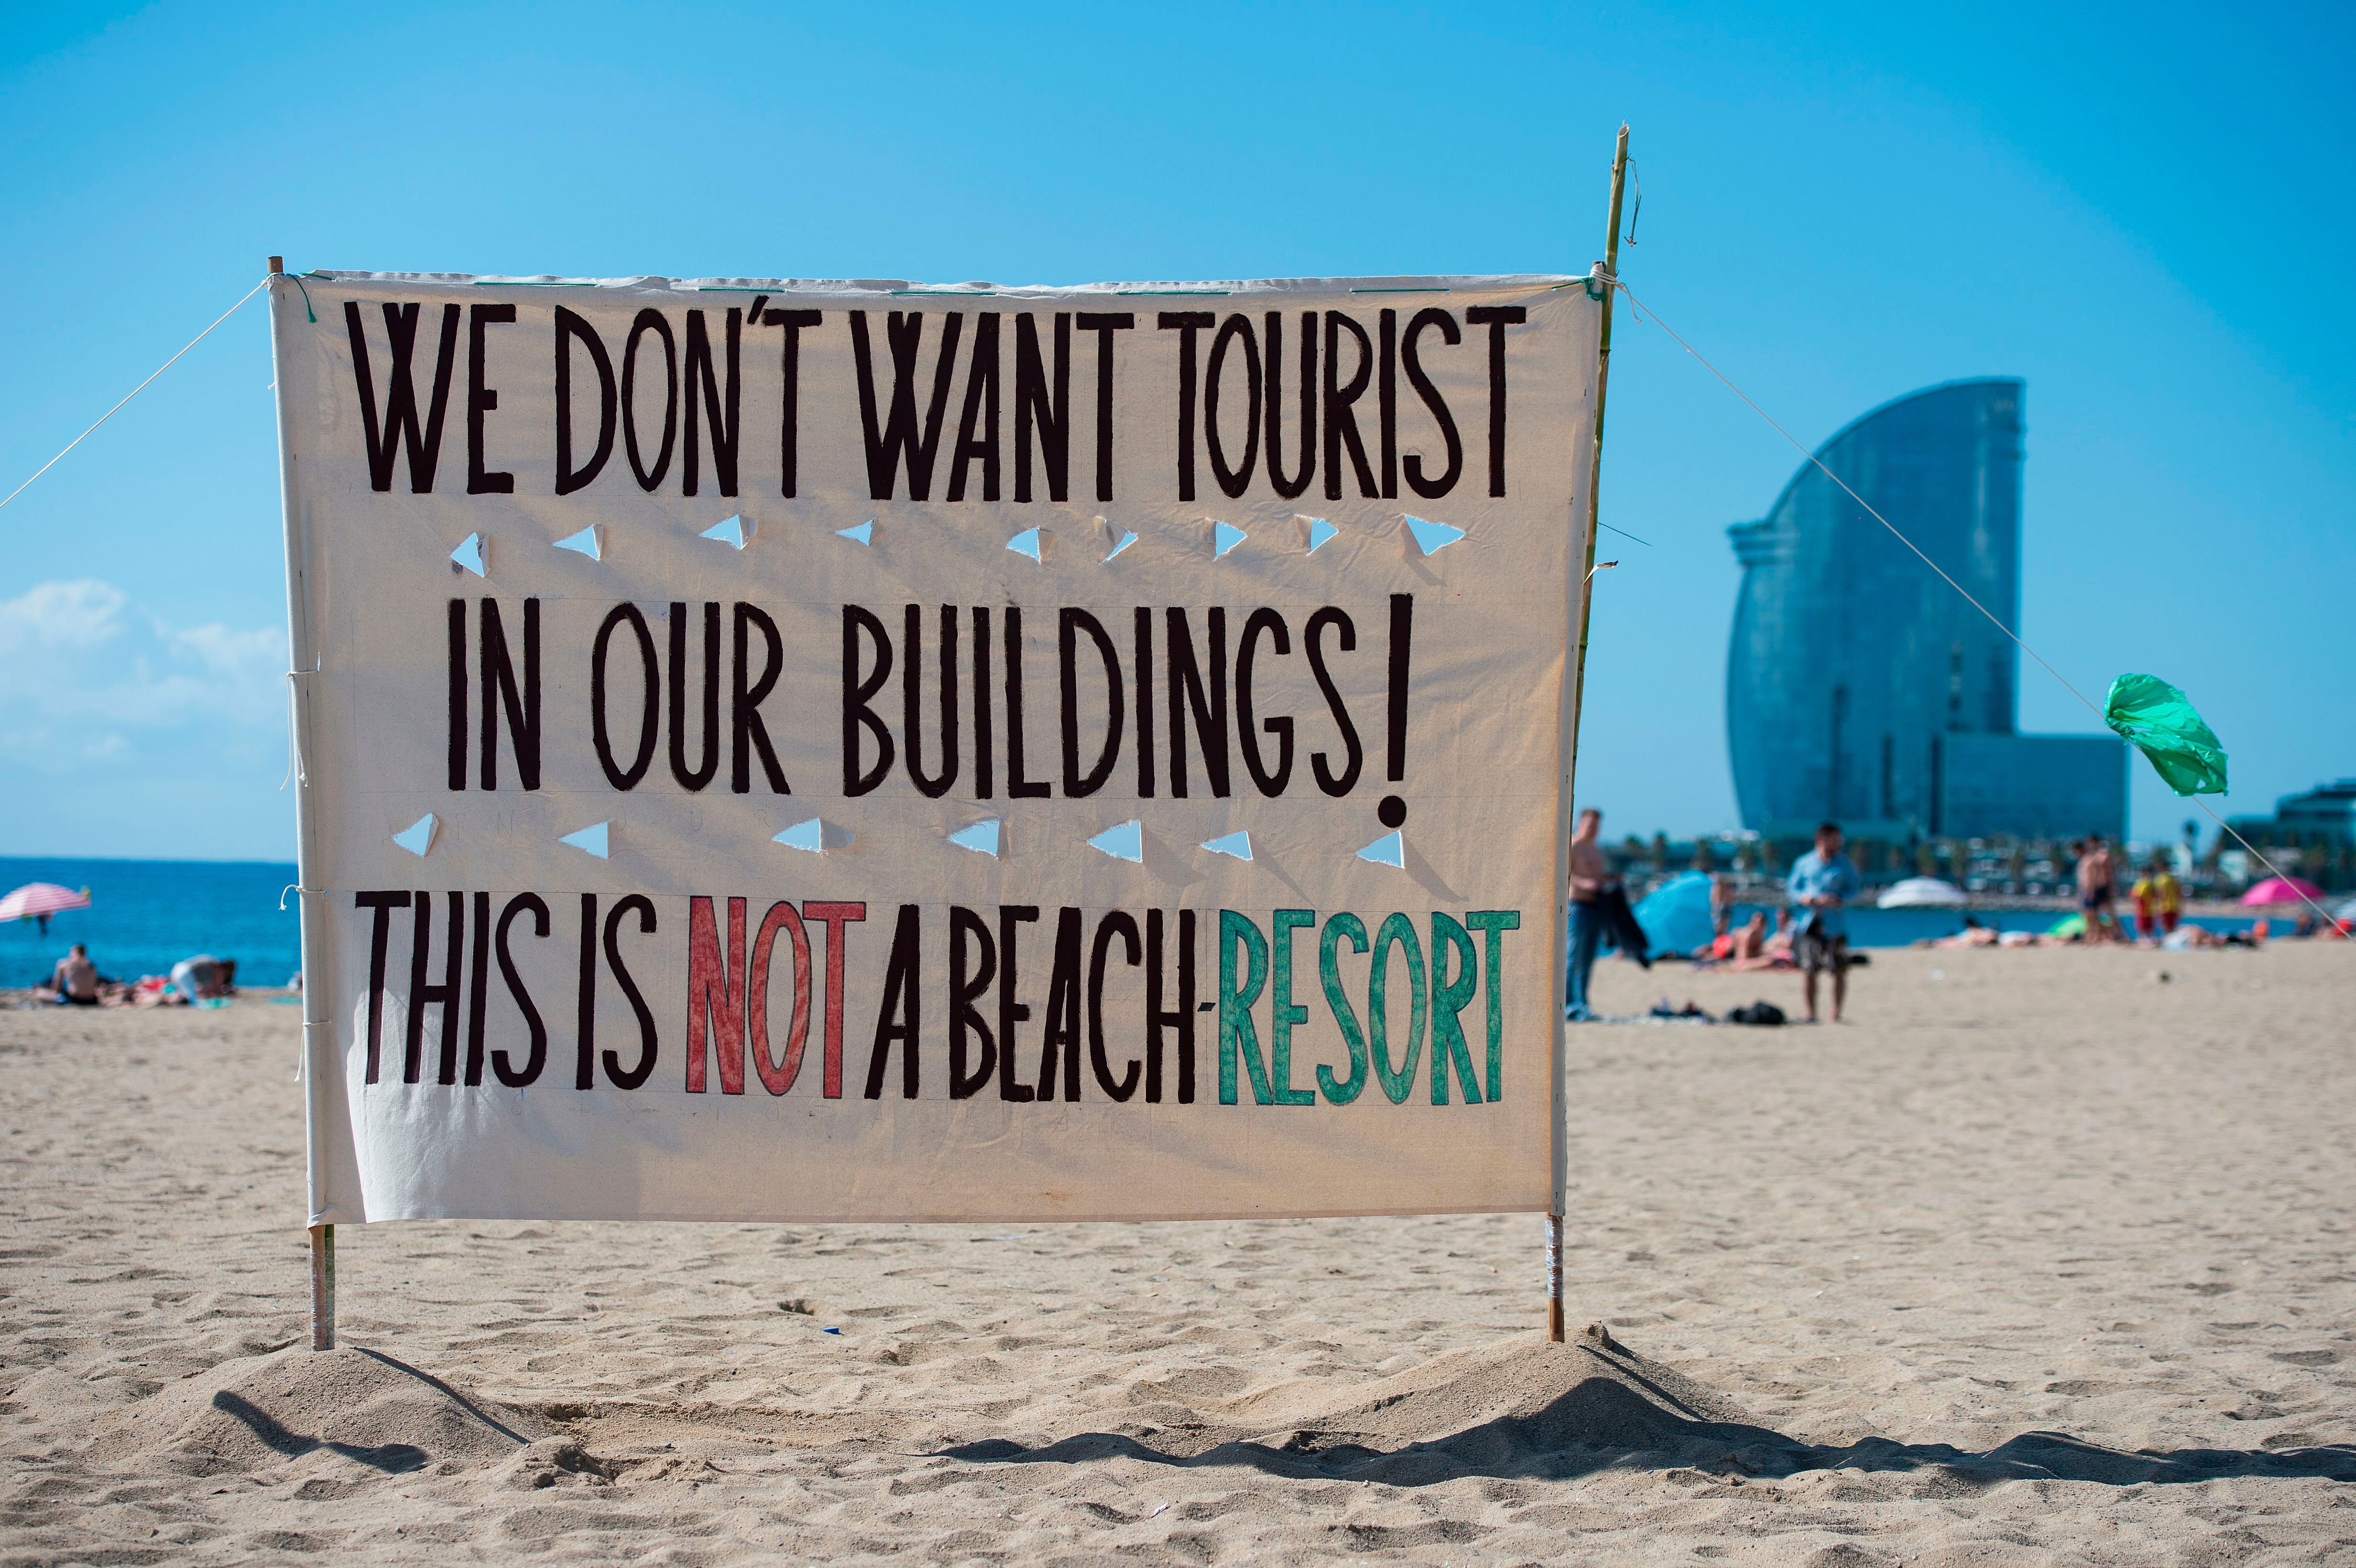 Anti-tourism banners in Barcelona in 2017